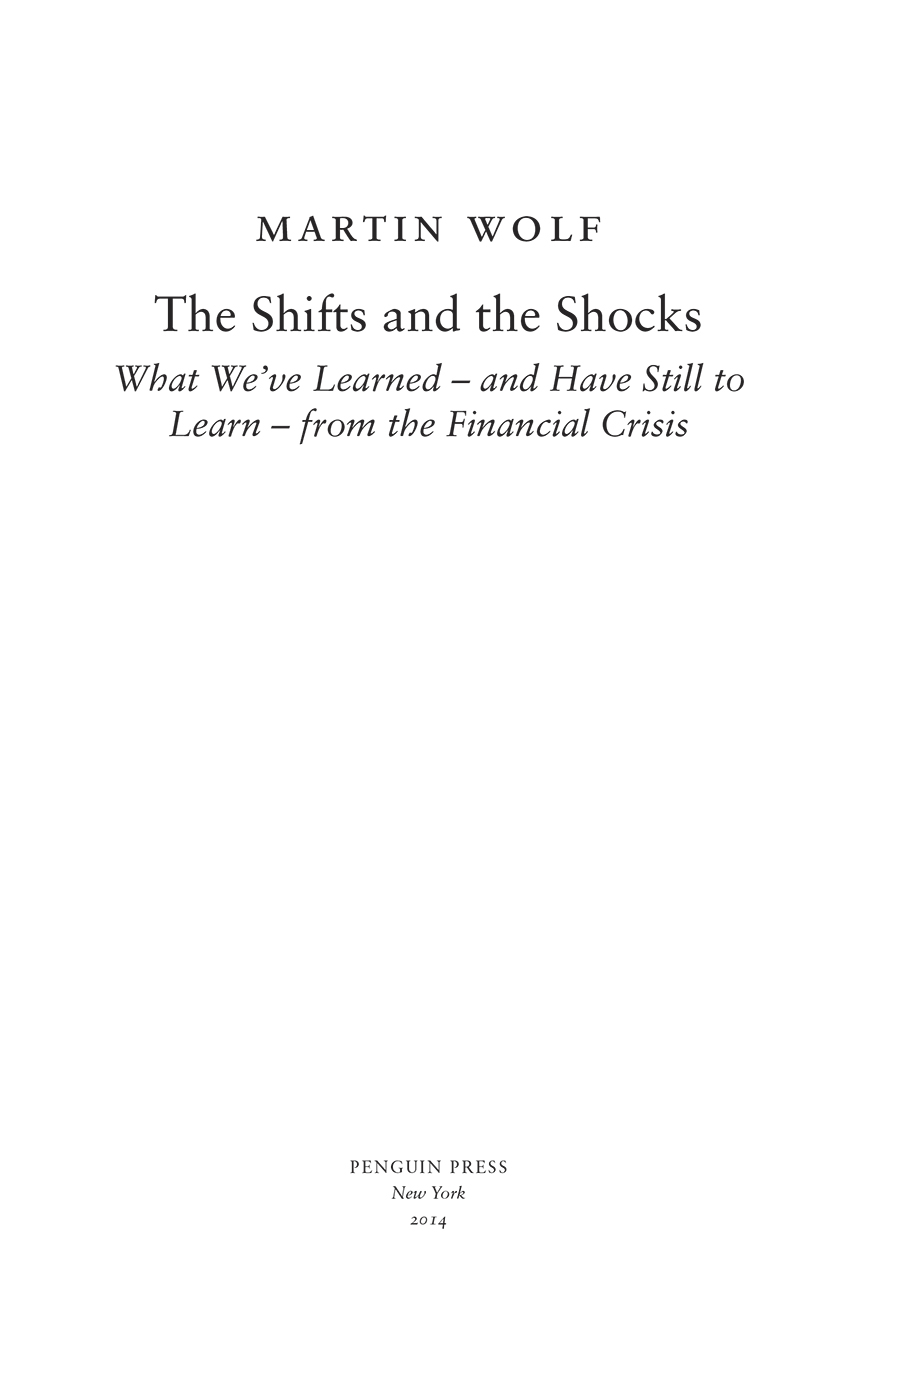 The shifts and the shocks what weve learned -- and have still to learn -- from the financial crisis - image 2